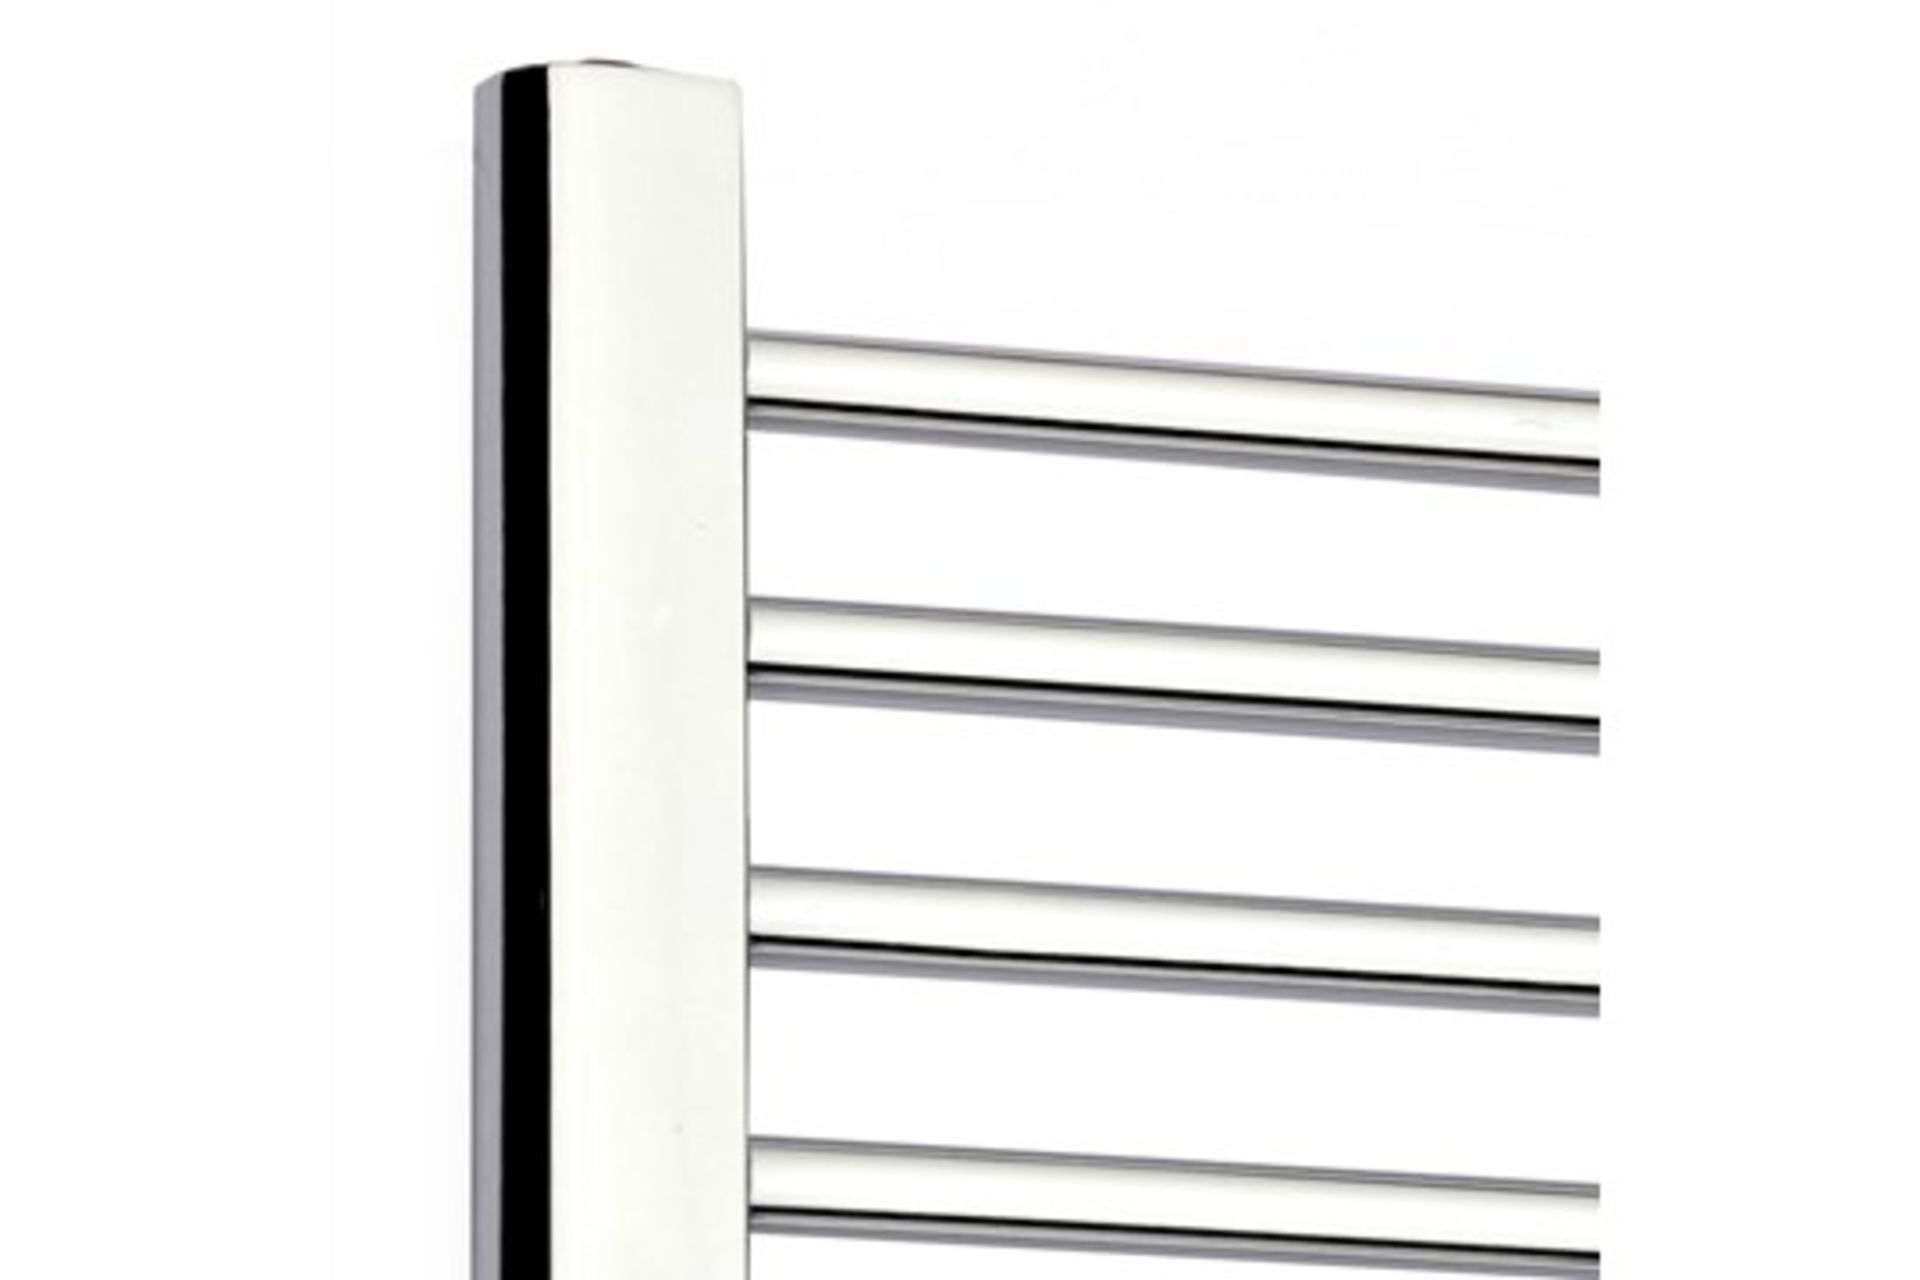 BRAND NEW BOXED 1600x500mm - 20mm Tubes - Chrome Heated Straight Rail Ladder Towel Radiator. Ma... - Image 3 of 3